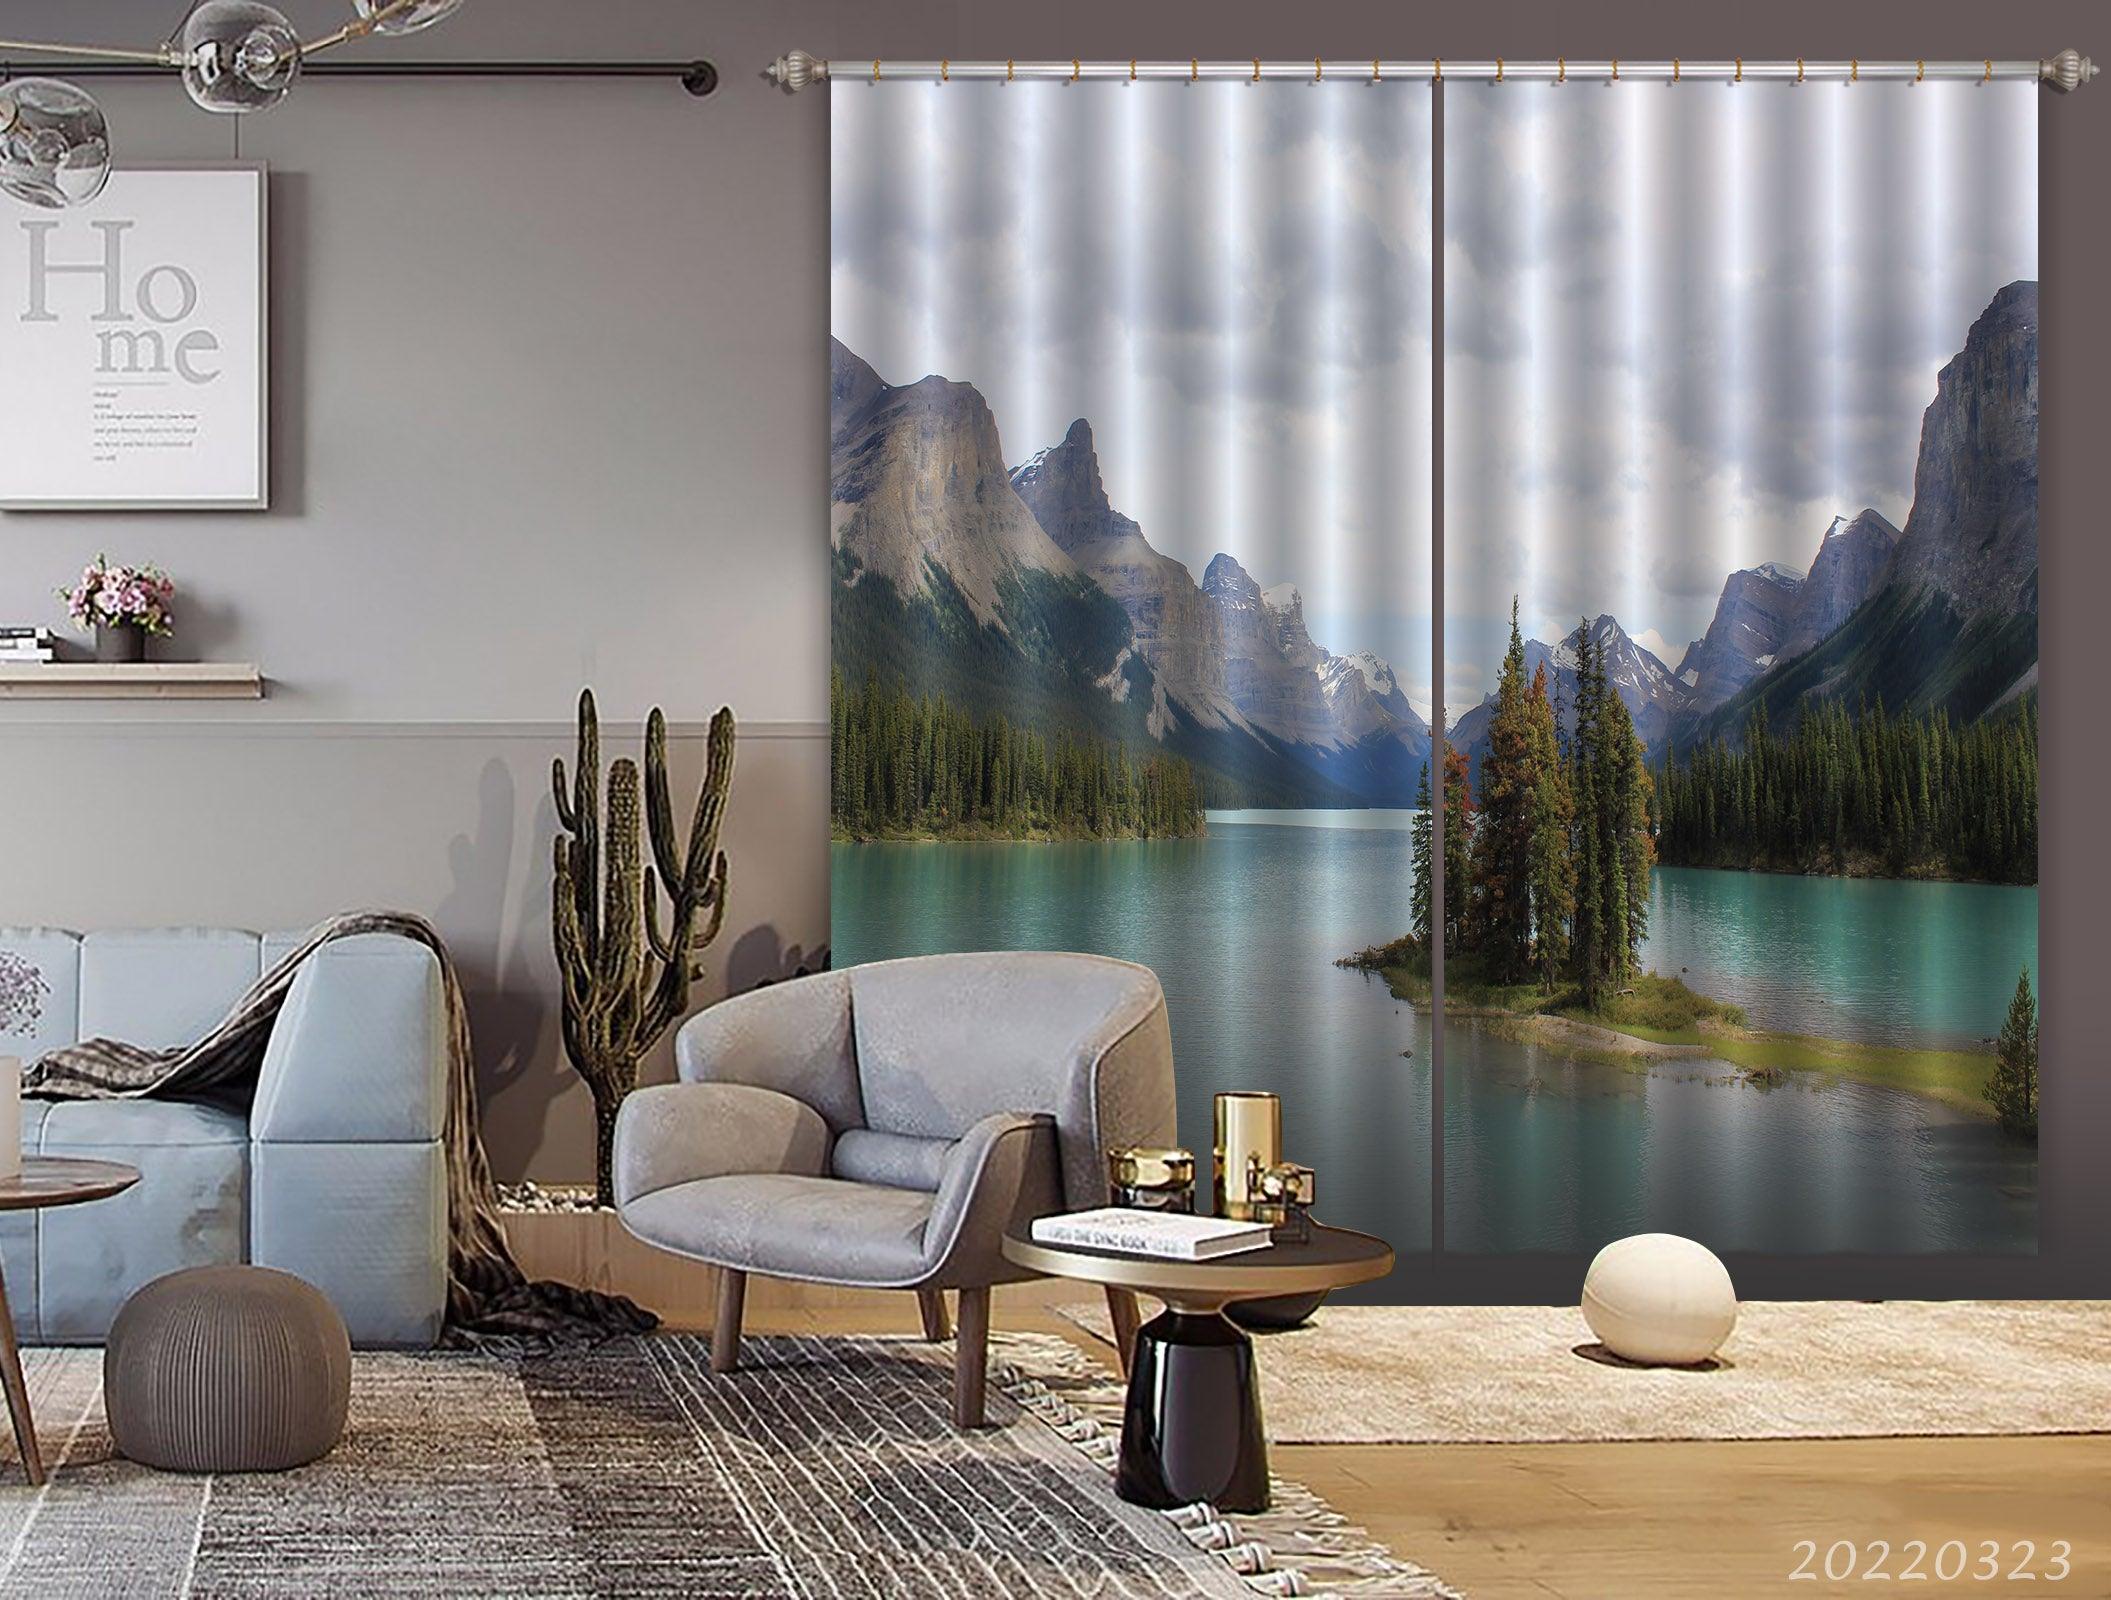 3D Woods Mountain Peak River Scenery Curtains and Drapes GD 2695- Jess Art Decoration